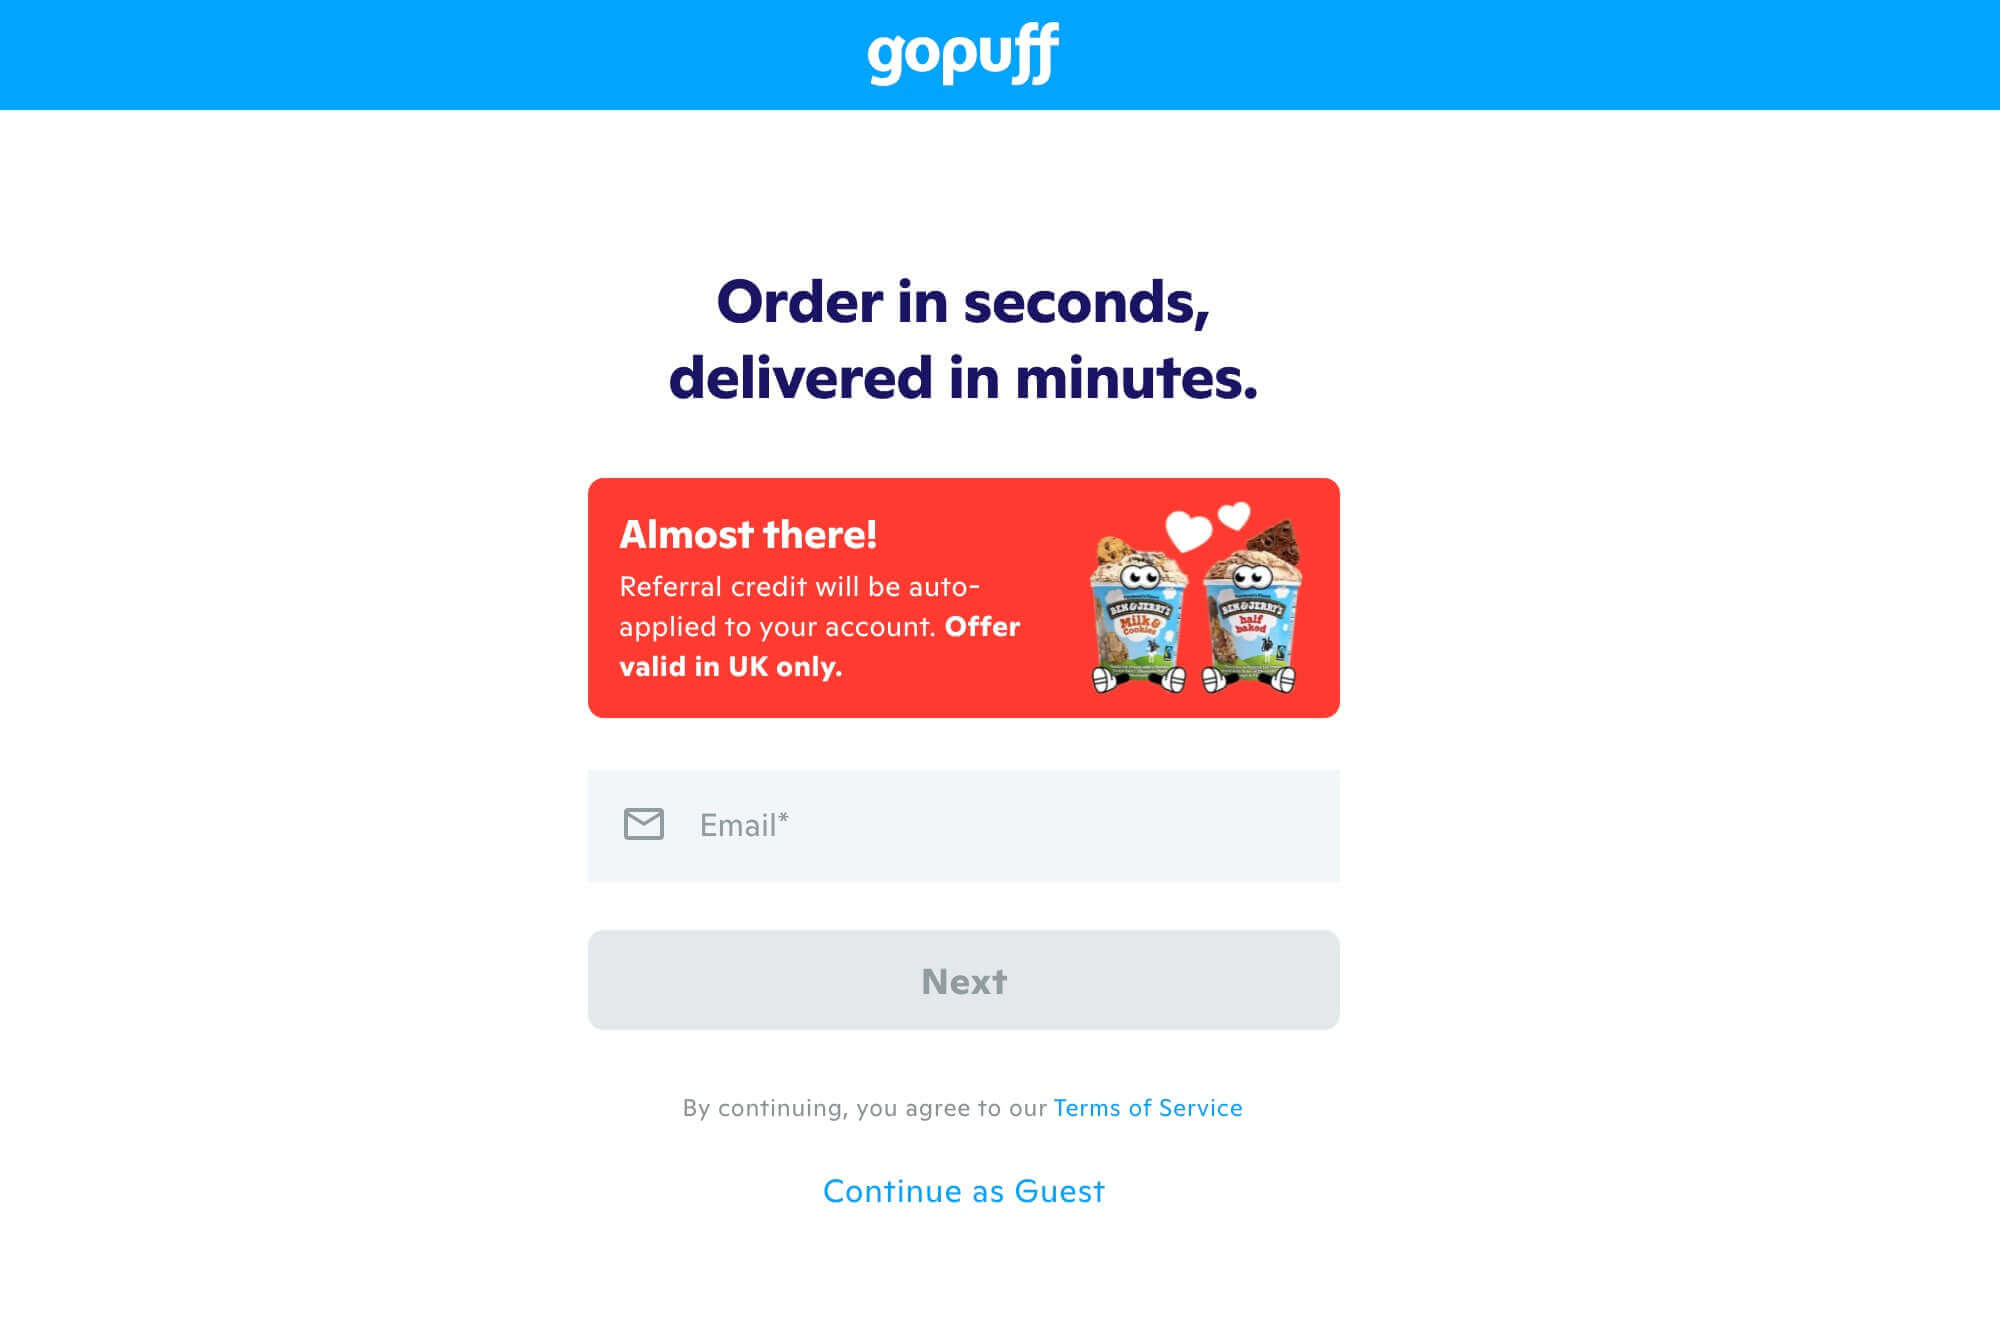 Gopuff referral code discount £10 off your first 3 order [£30 total